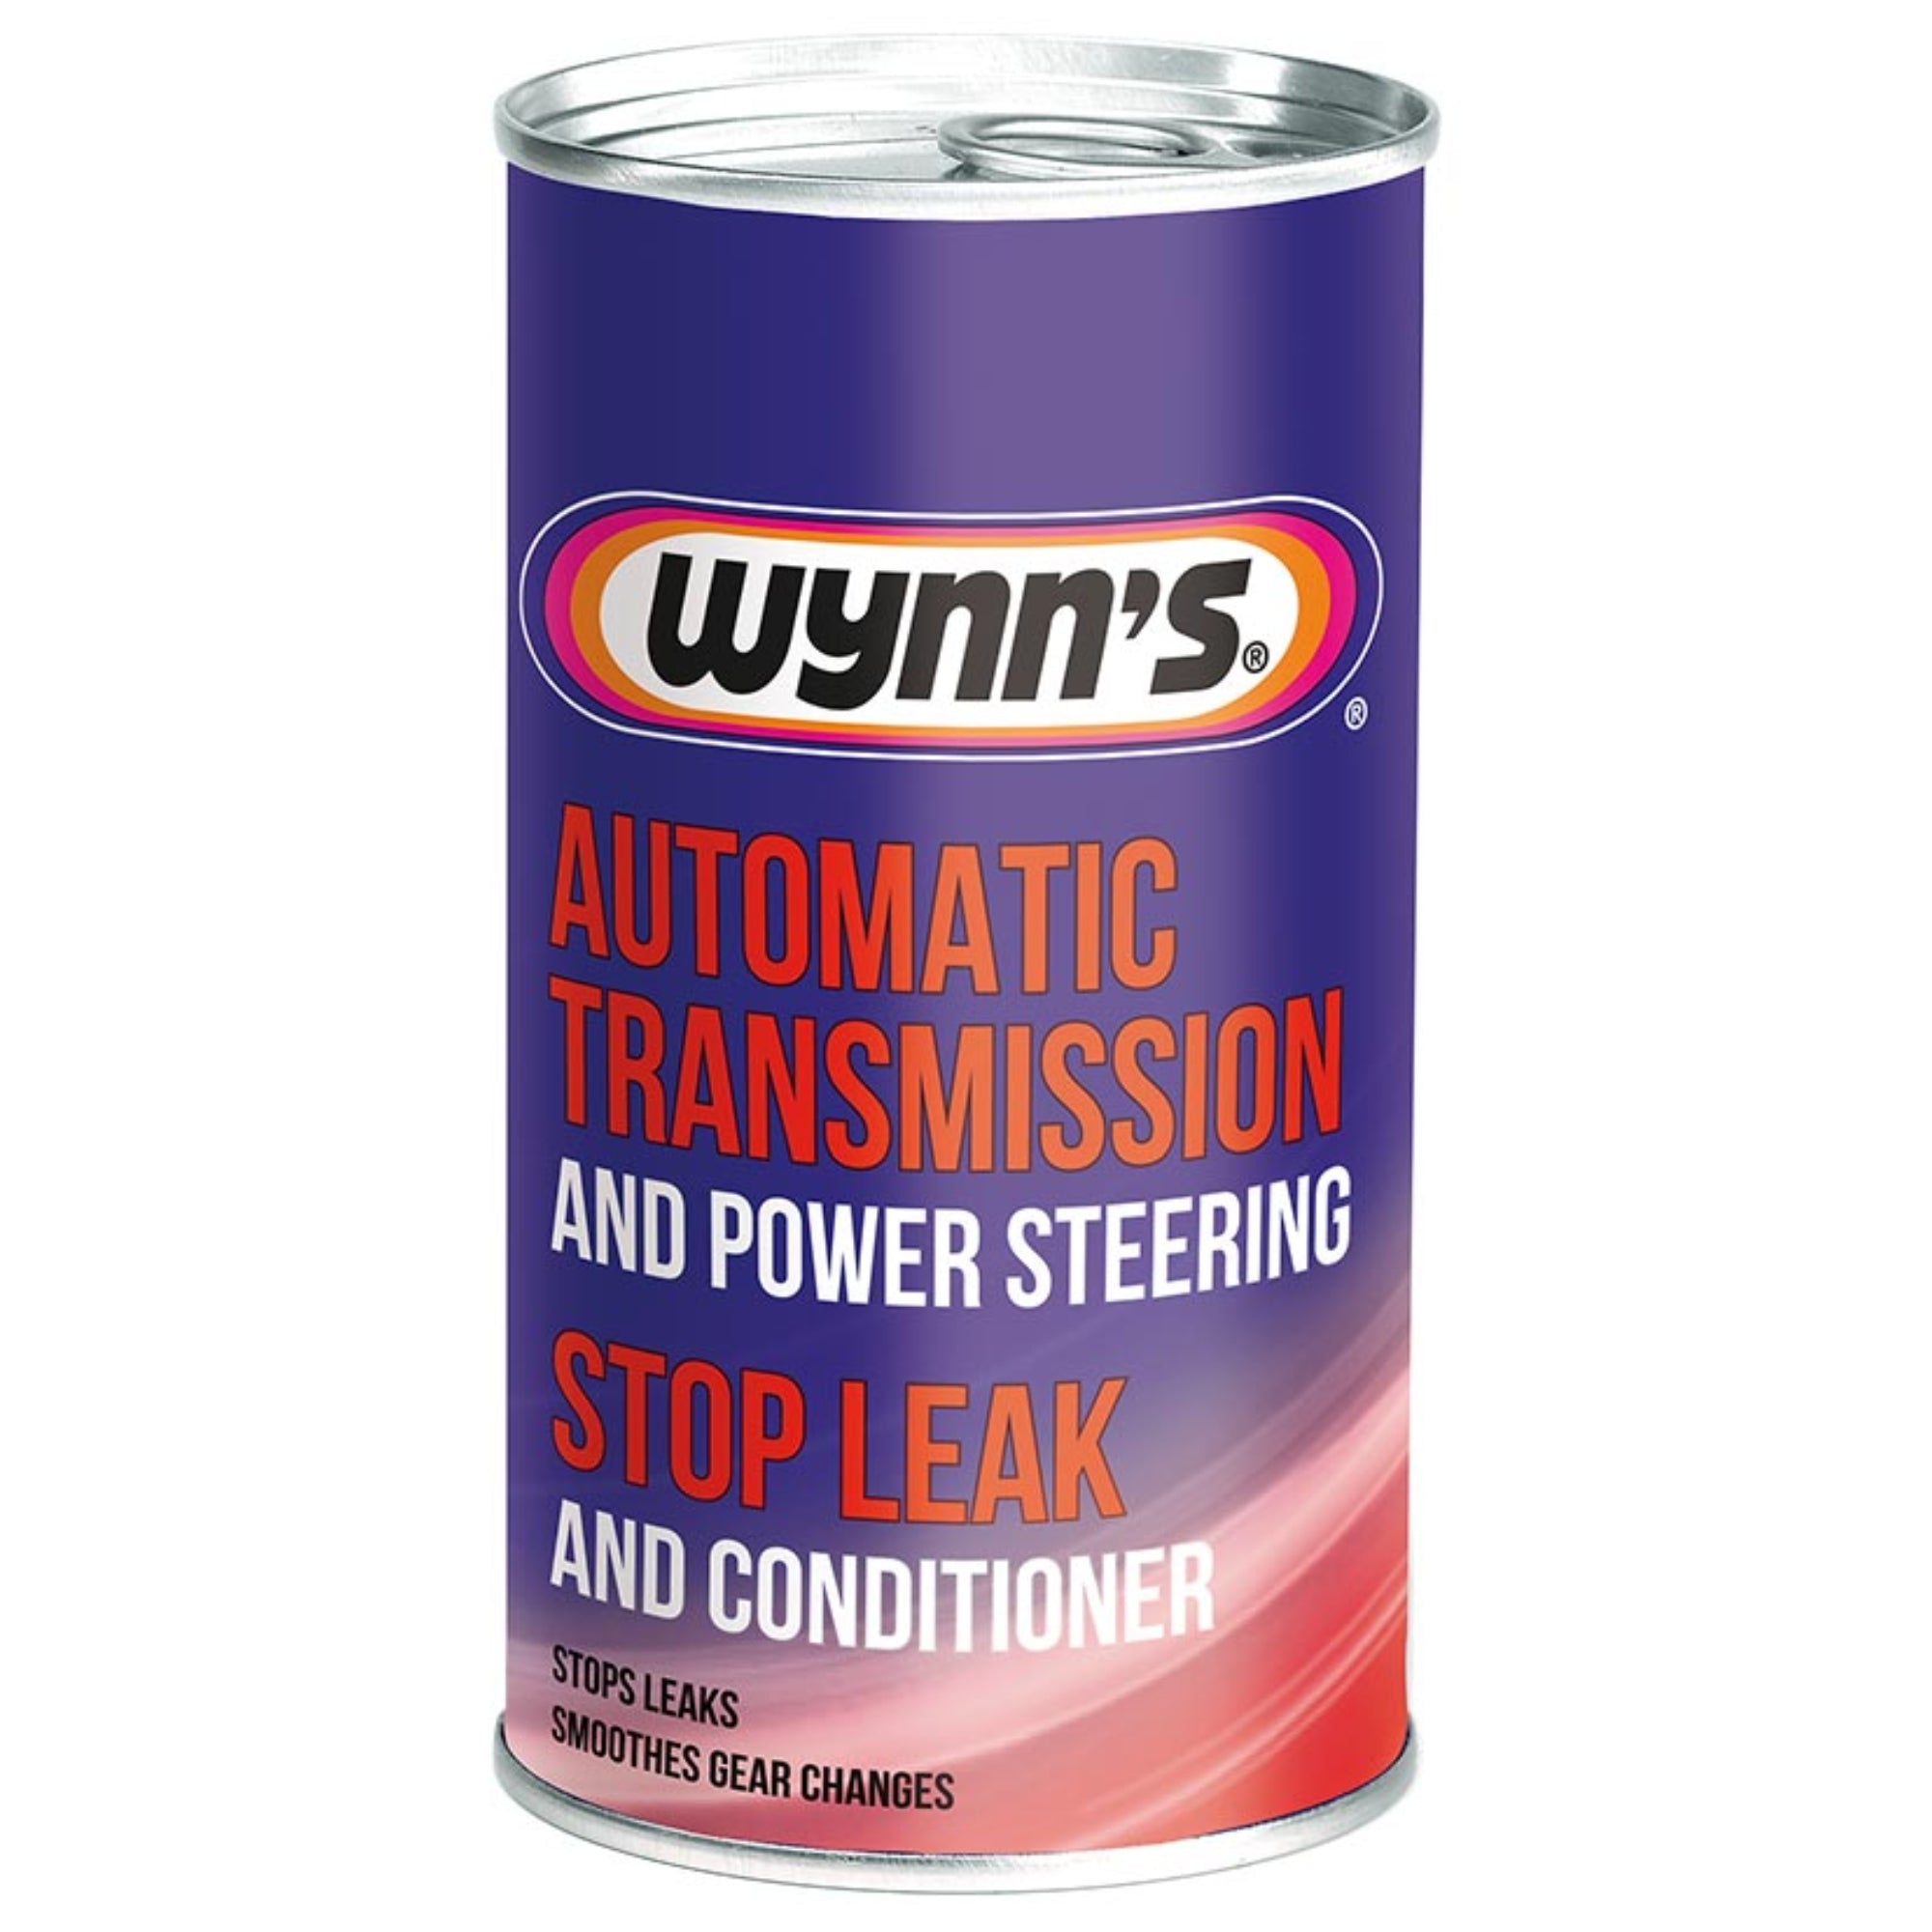 Wynn's Automatic Transmission And Power Steering Stop Leak And Conditioner